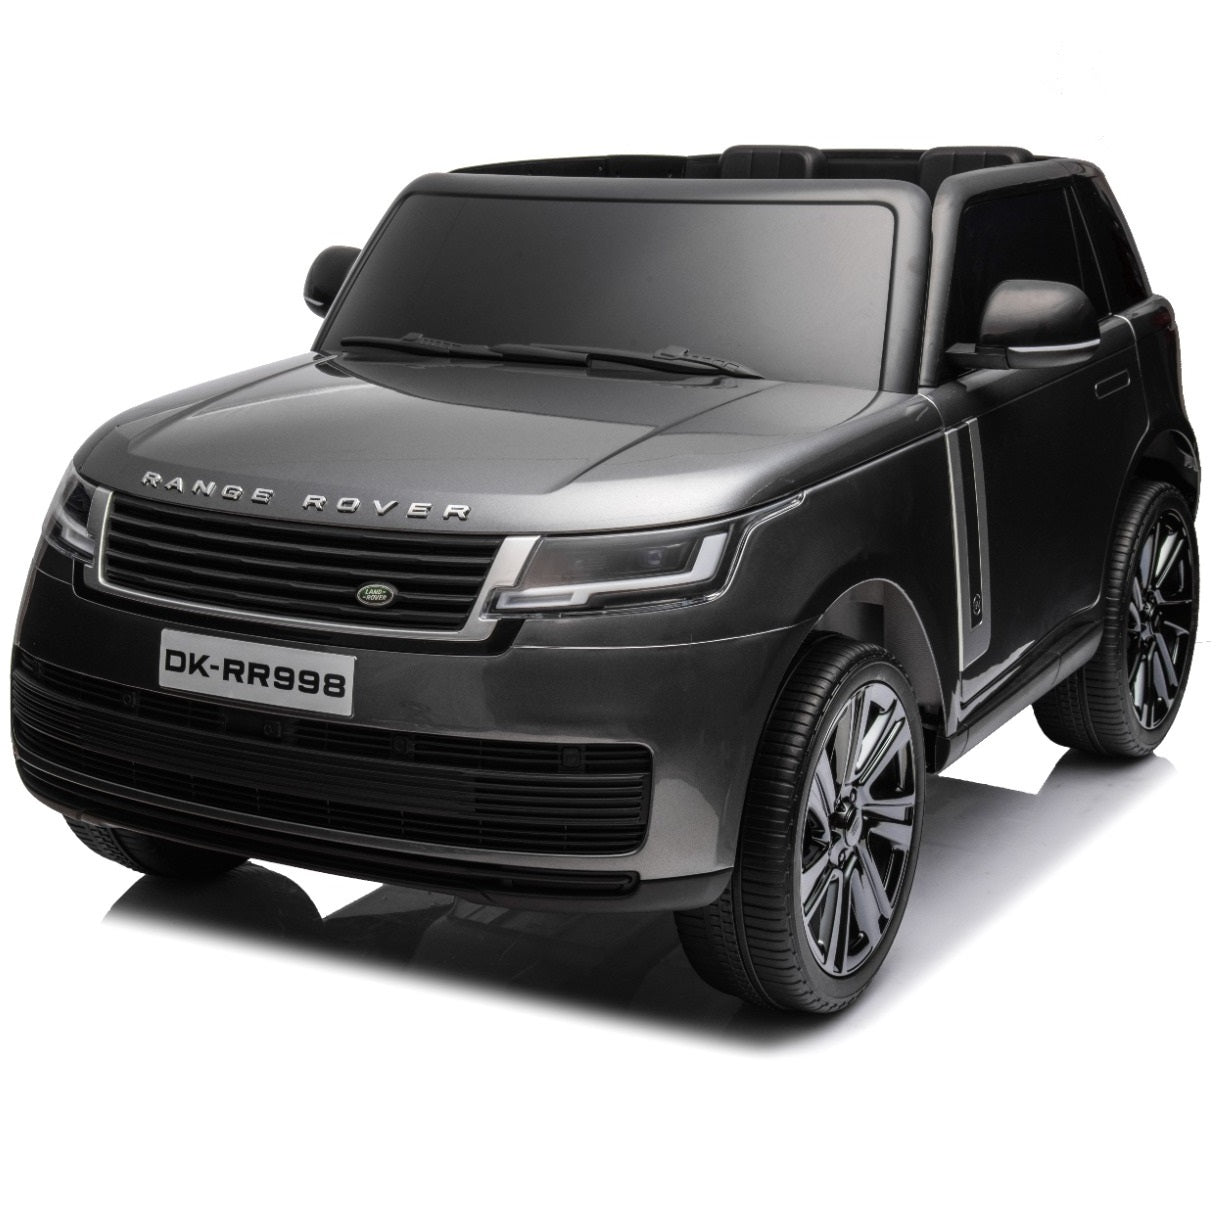 SUV Kids Electric Ride-on Licensed Range Rover Signature Sport